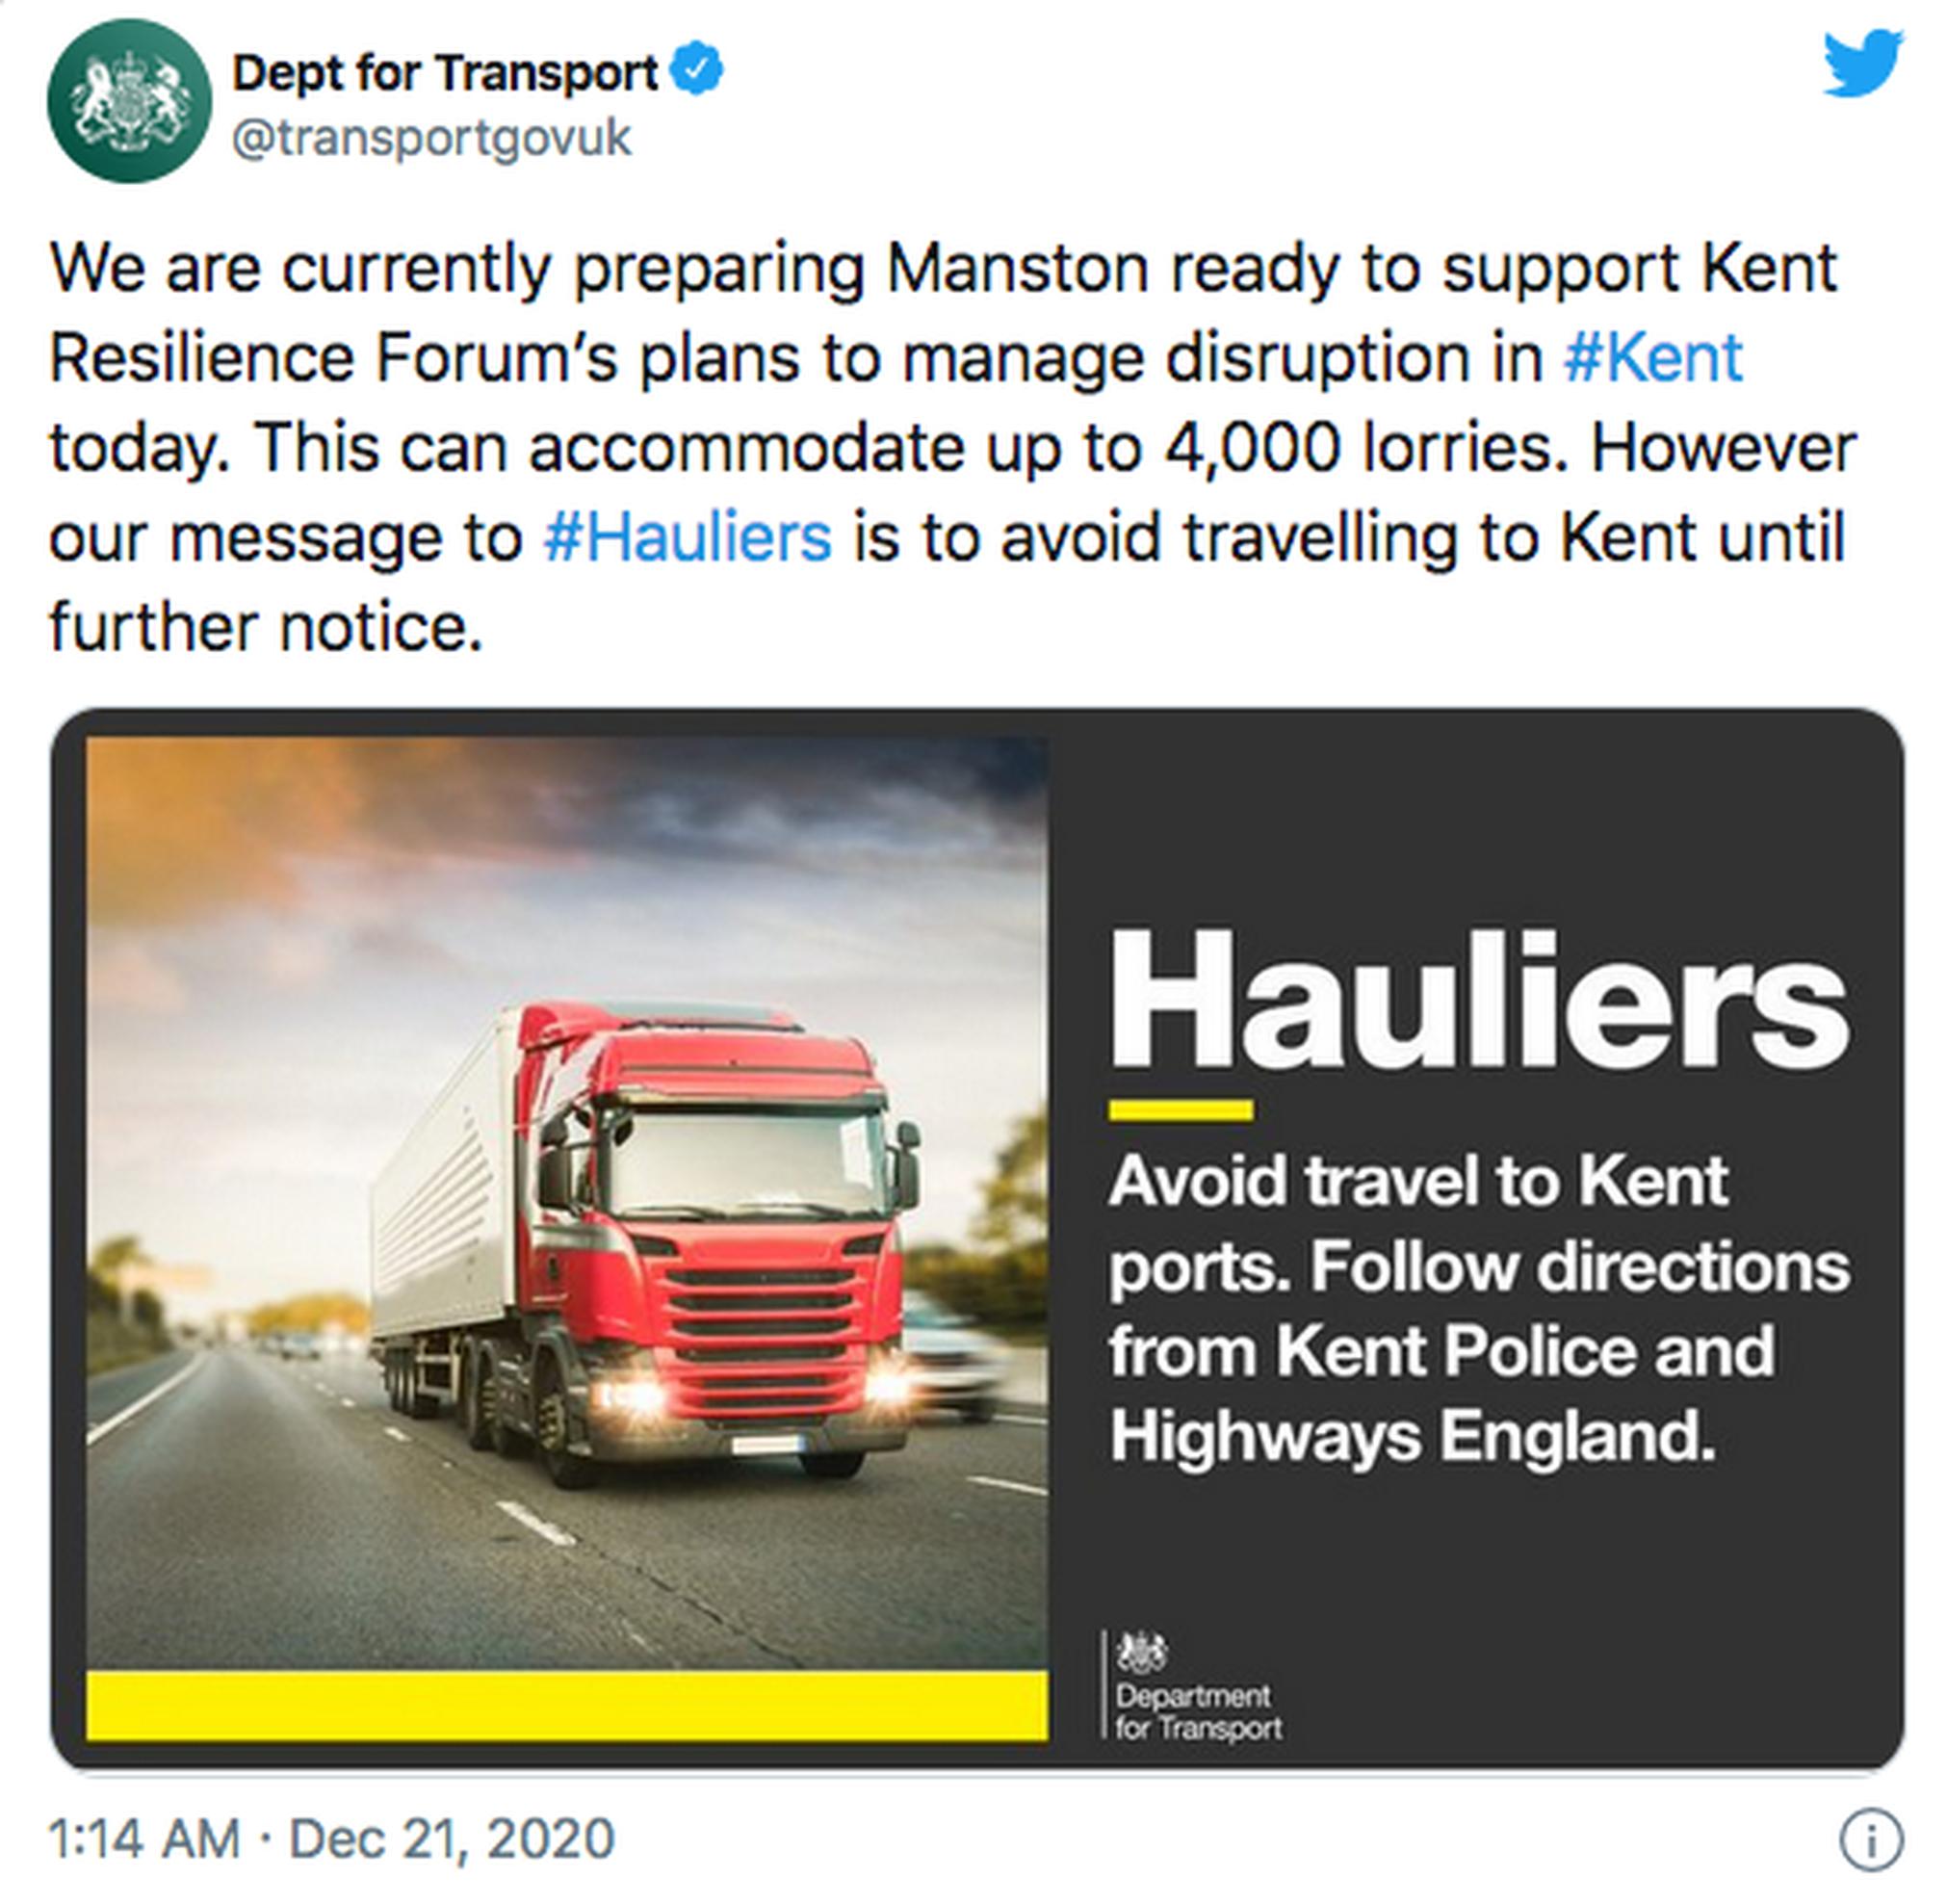 The DfT is using social media to alert HGV drivers to the latest developments regarding travel and parking options in Kent